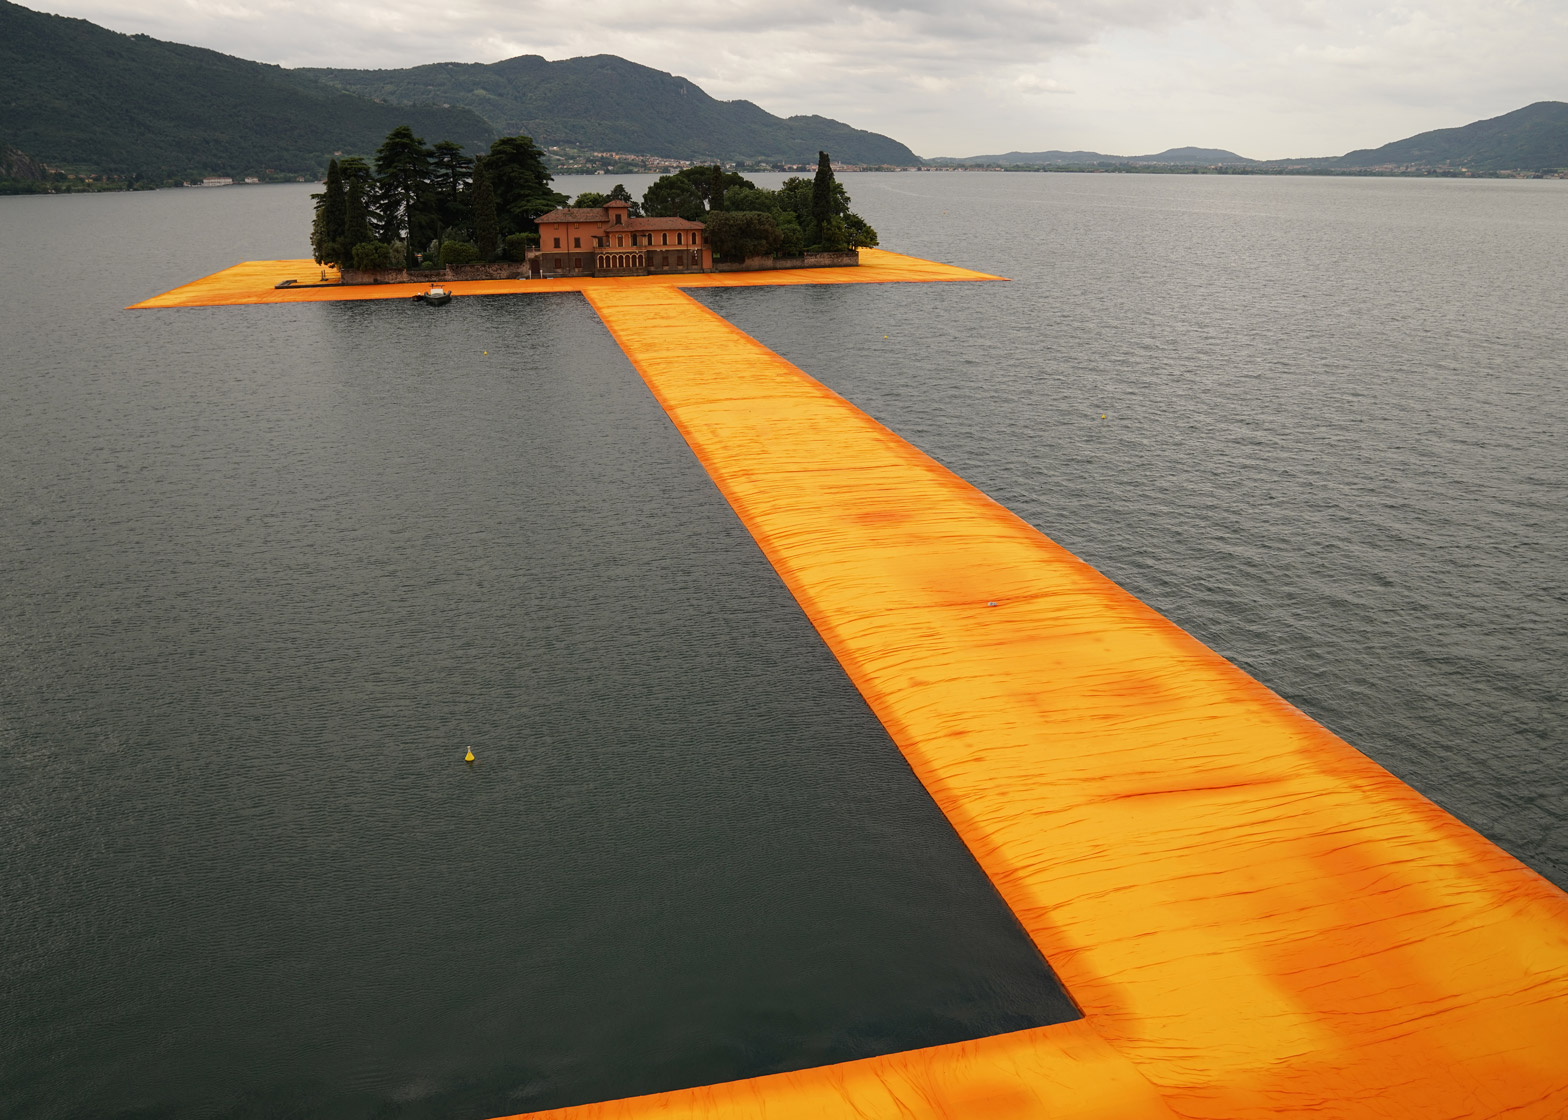 Christo Accused Of Wasting Public Money On Floating Piers